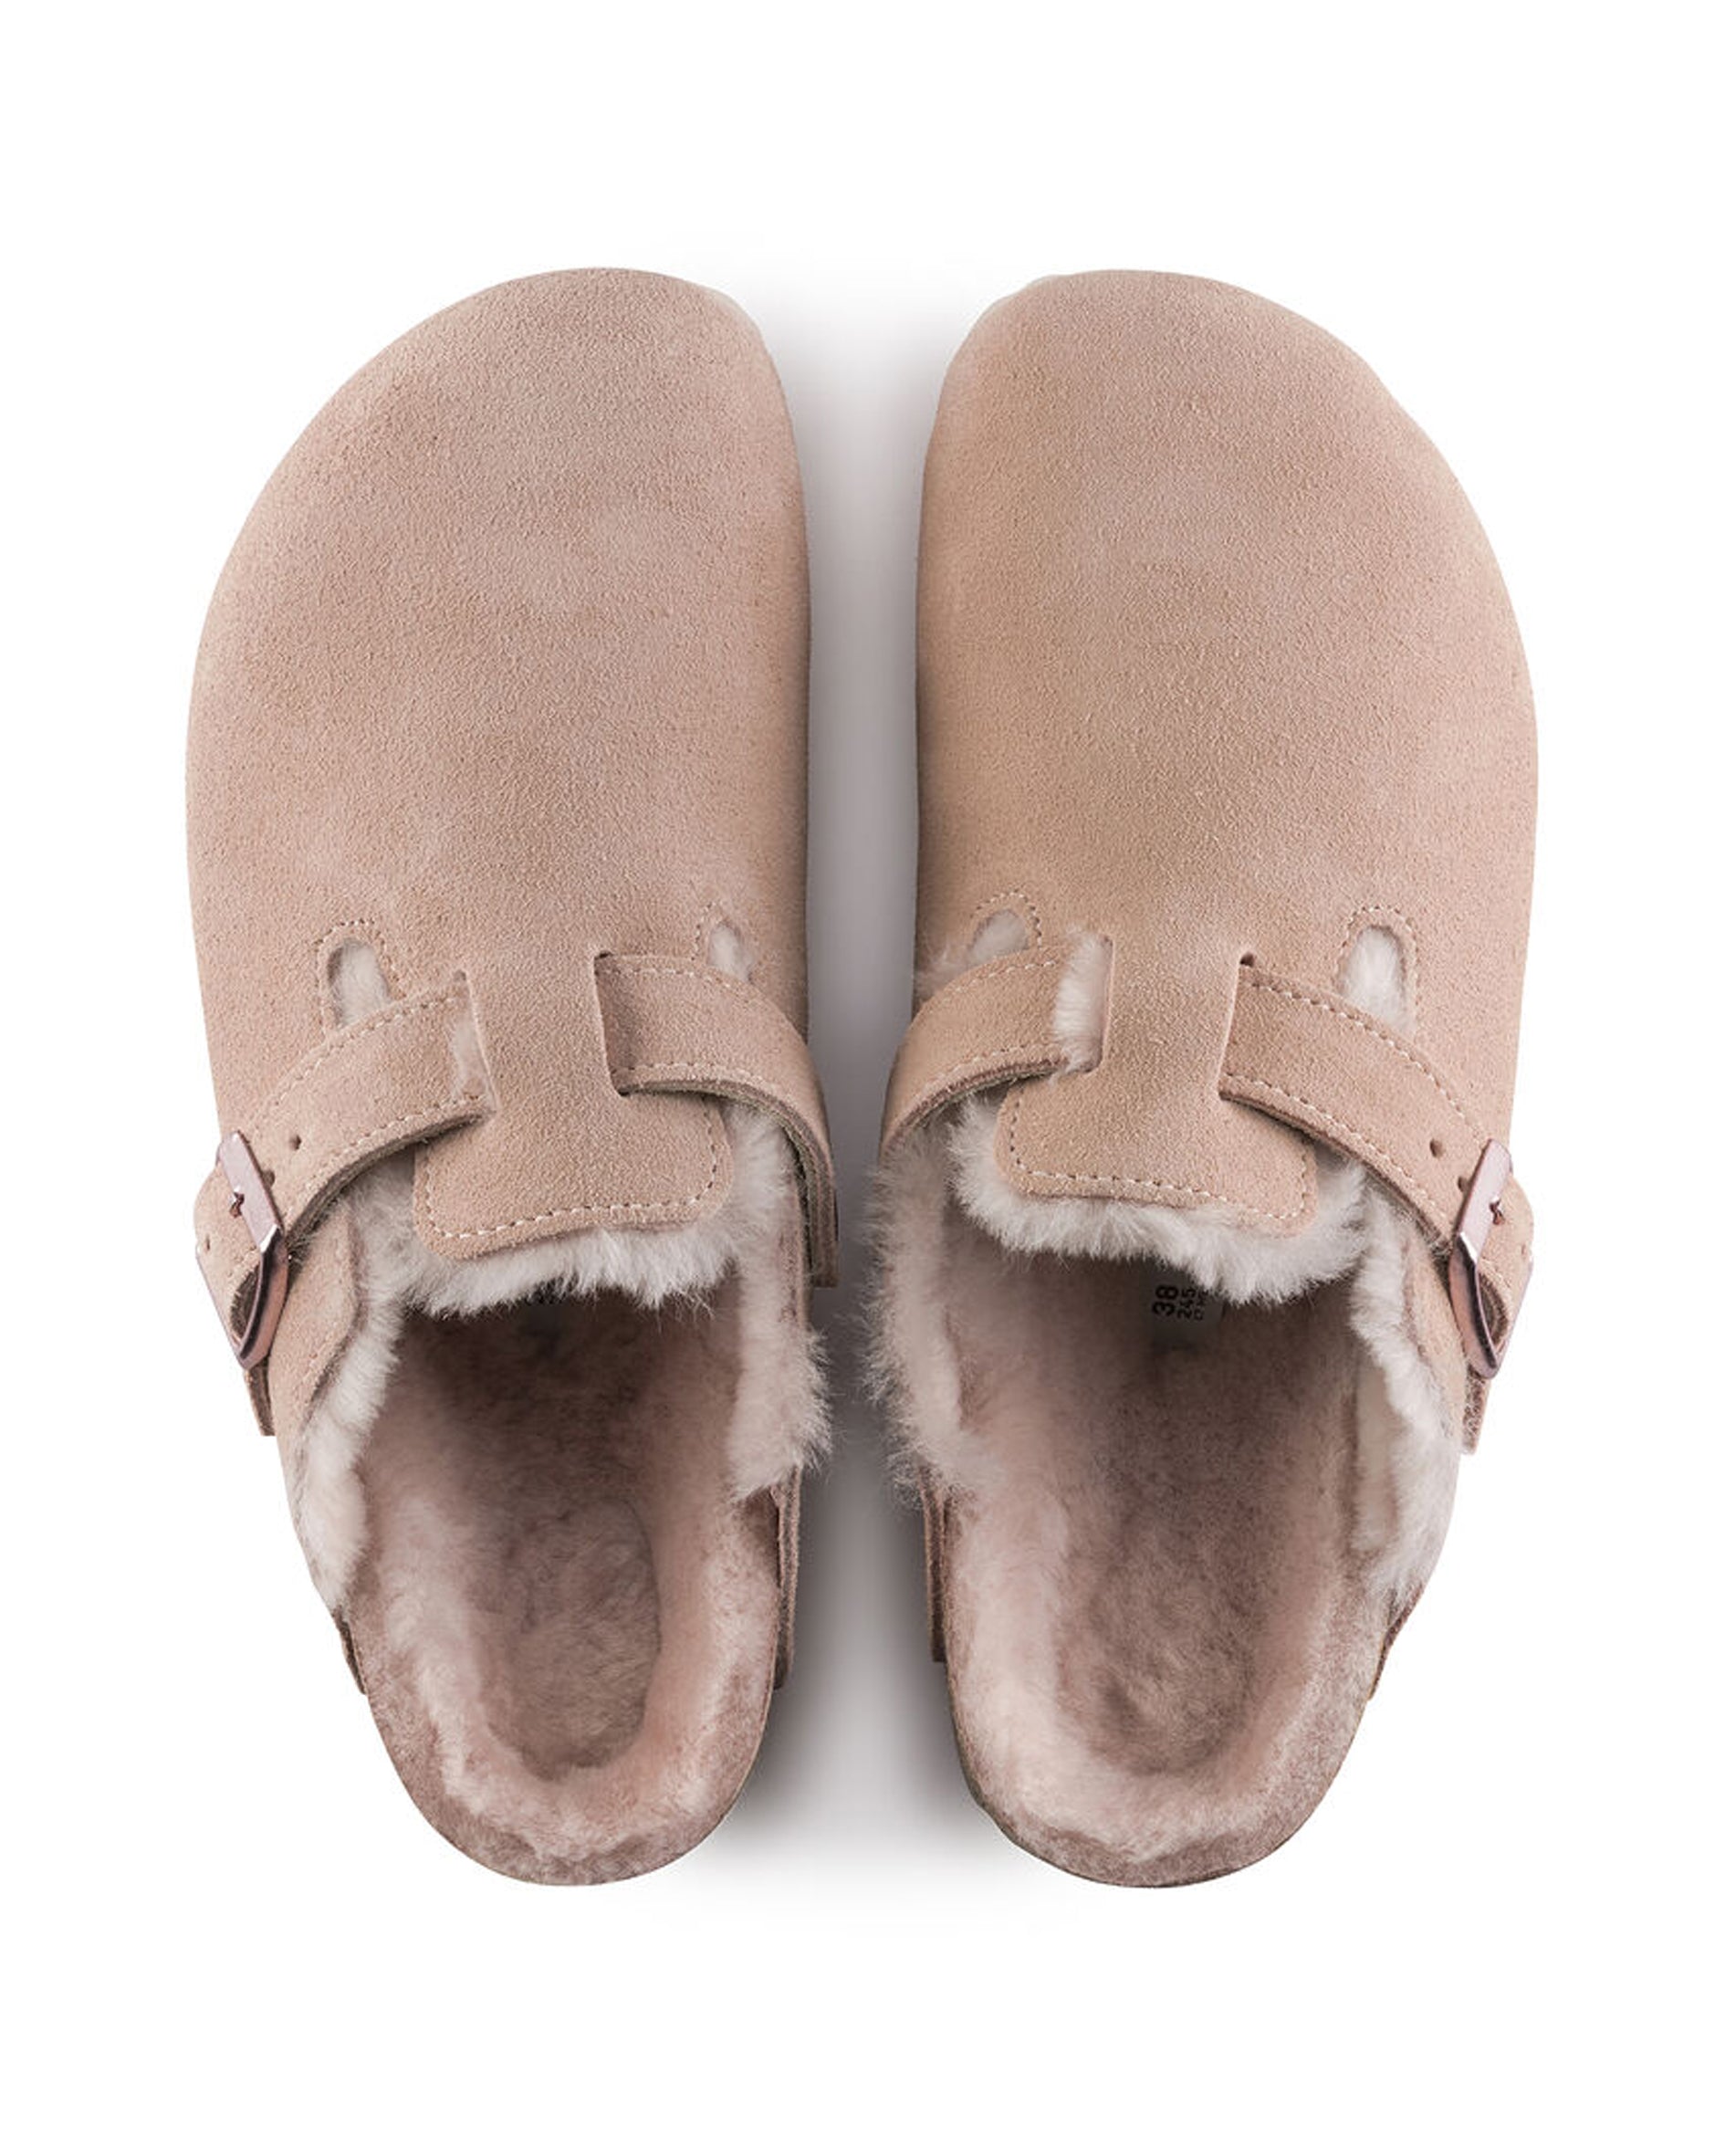 Boston Shearling Light Rose Suede Leather Clogs